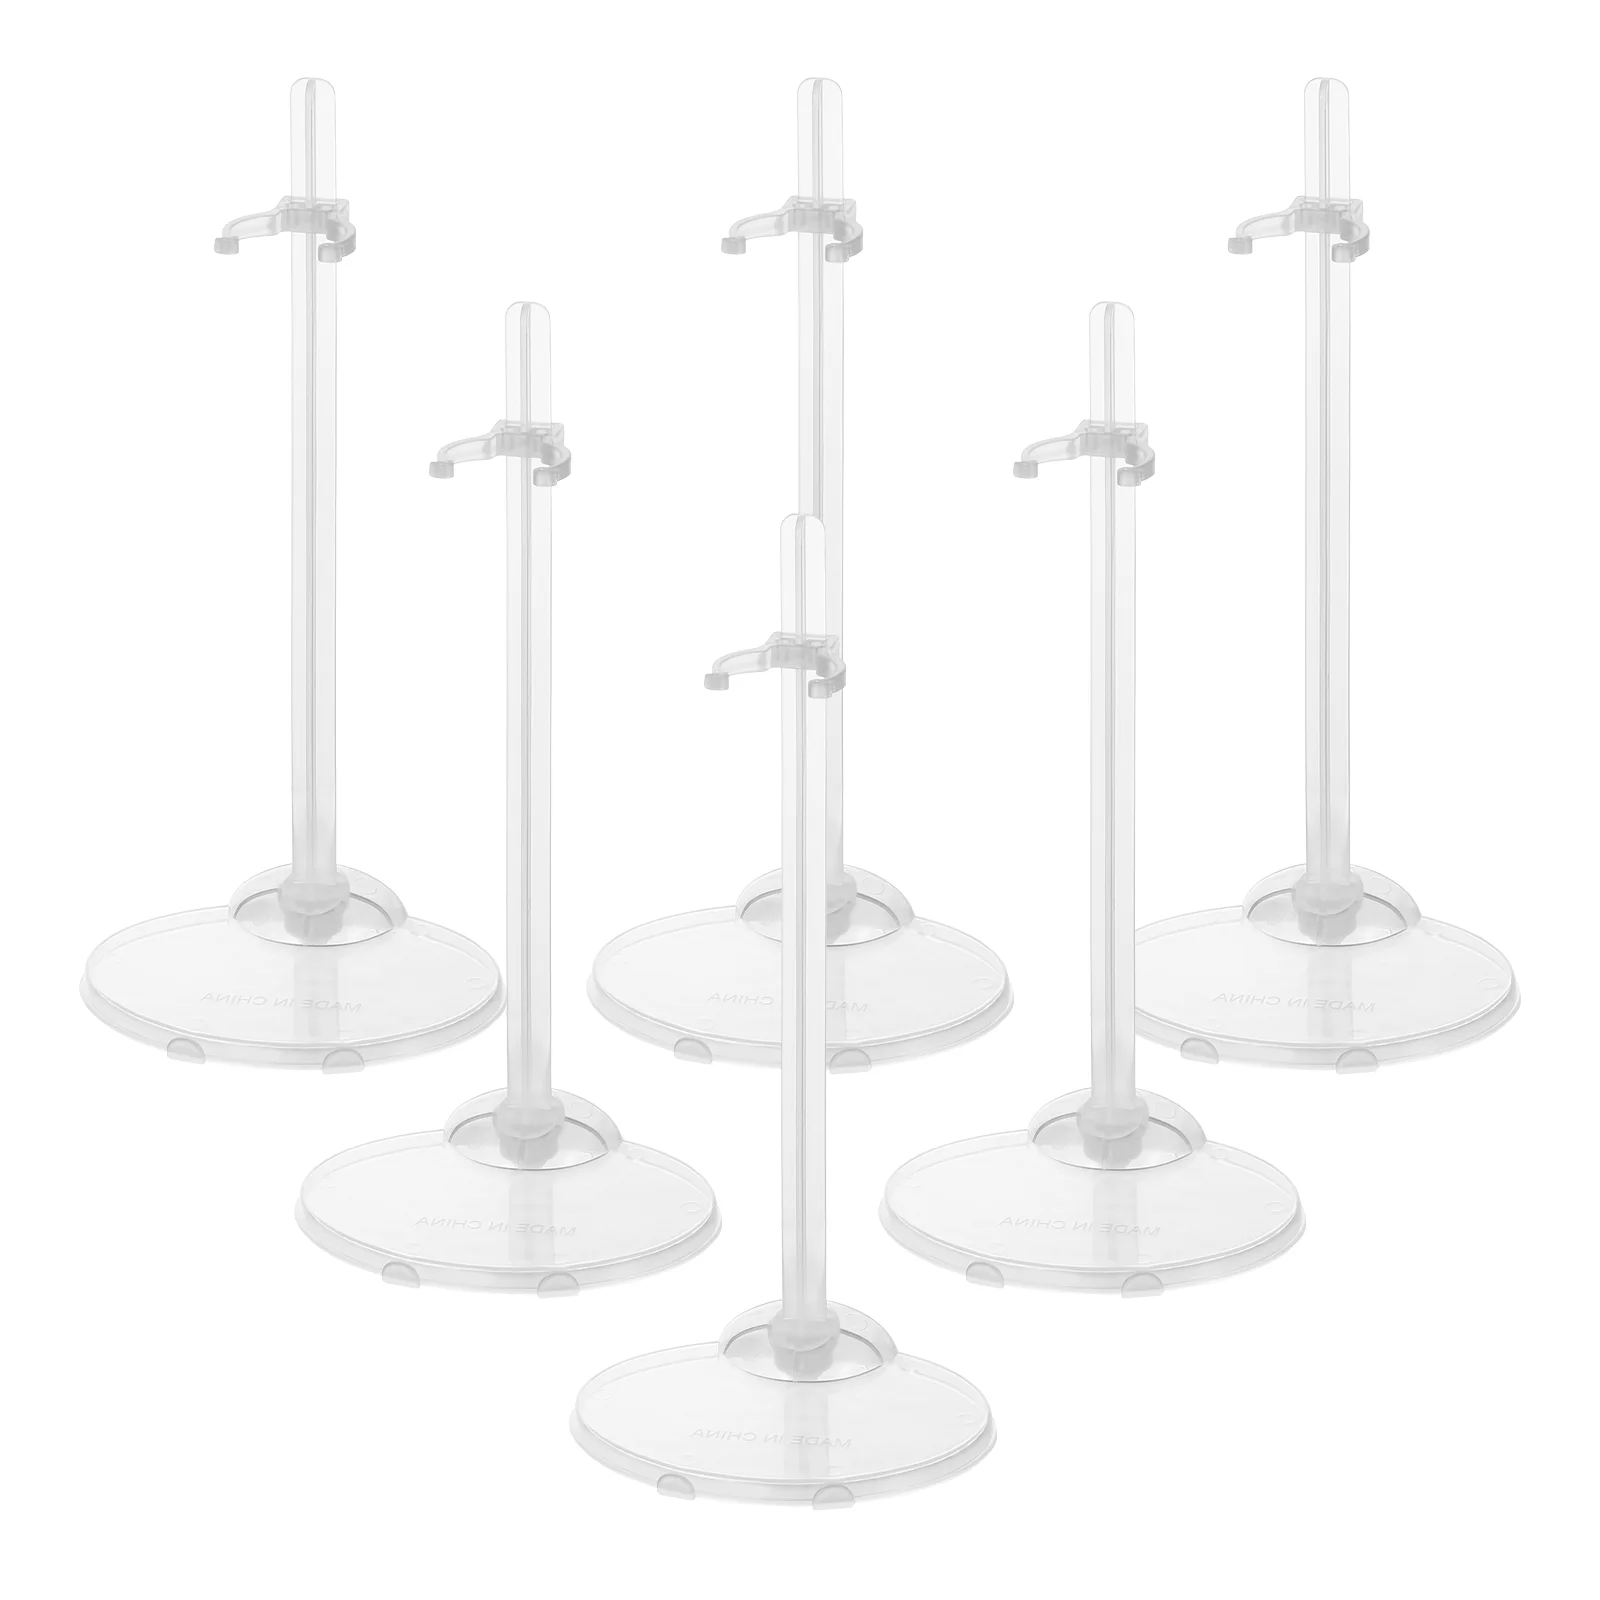 pgy japanese style toothbrush rack no punching toothbrush holder bathroom bathroom no trace save space plastic rack accessories Doll Holding Stand Doll Support Display Rack Adjustable Transparent Model Furniture Plastic Mannequin Dolls Accessories